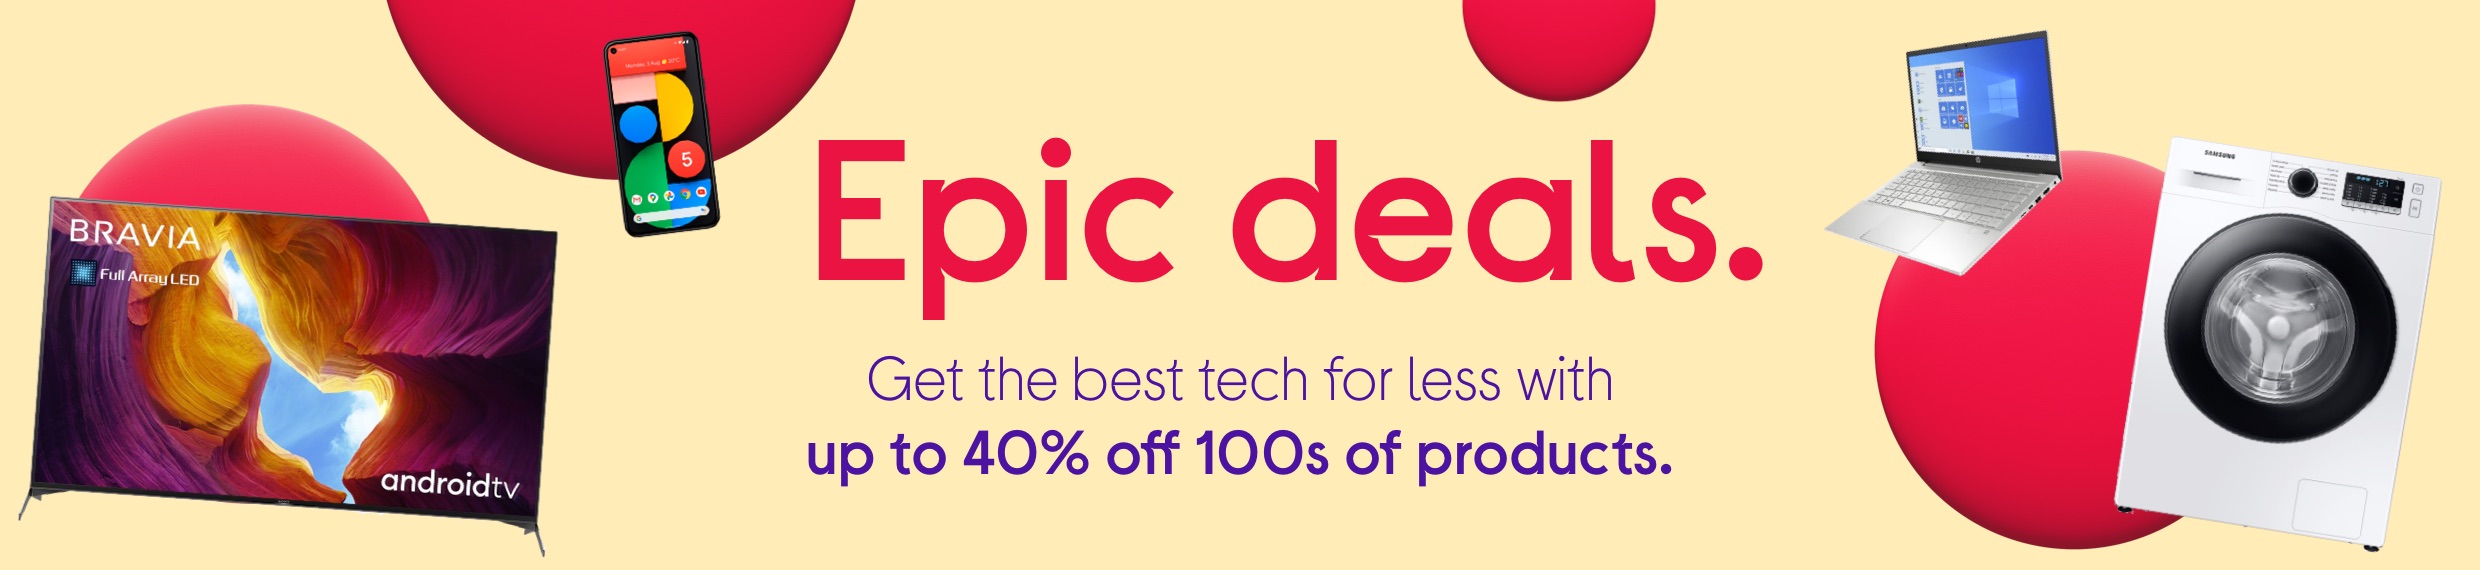 Epic deals. Save up tp 40% on 100s of products.